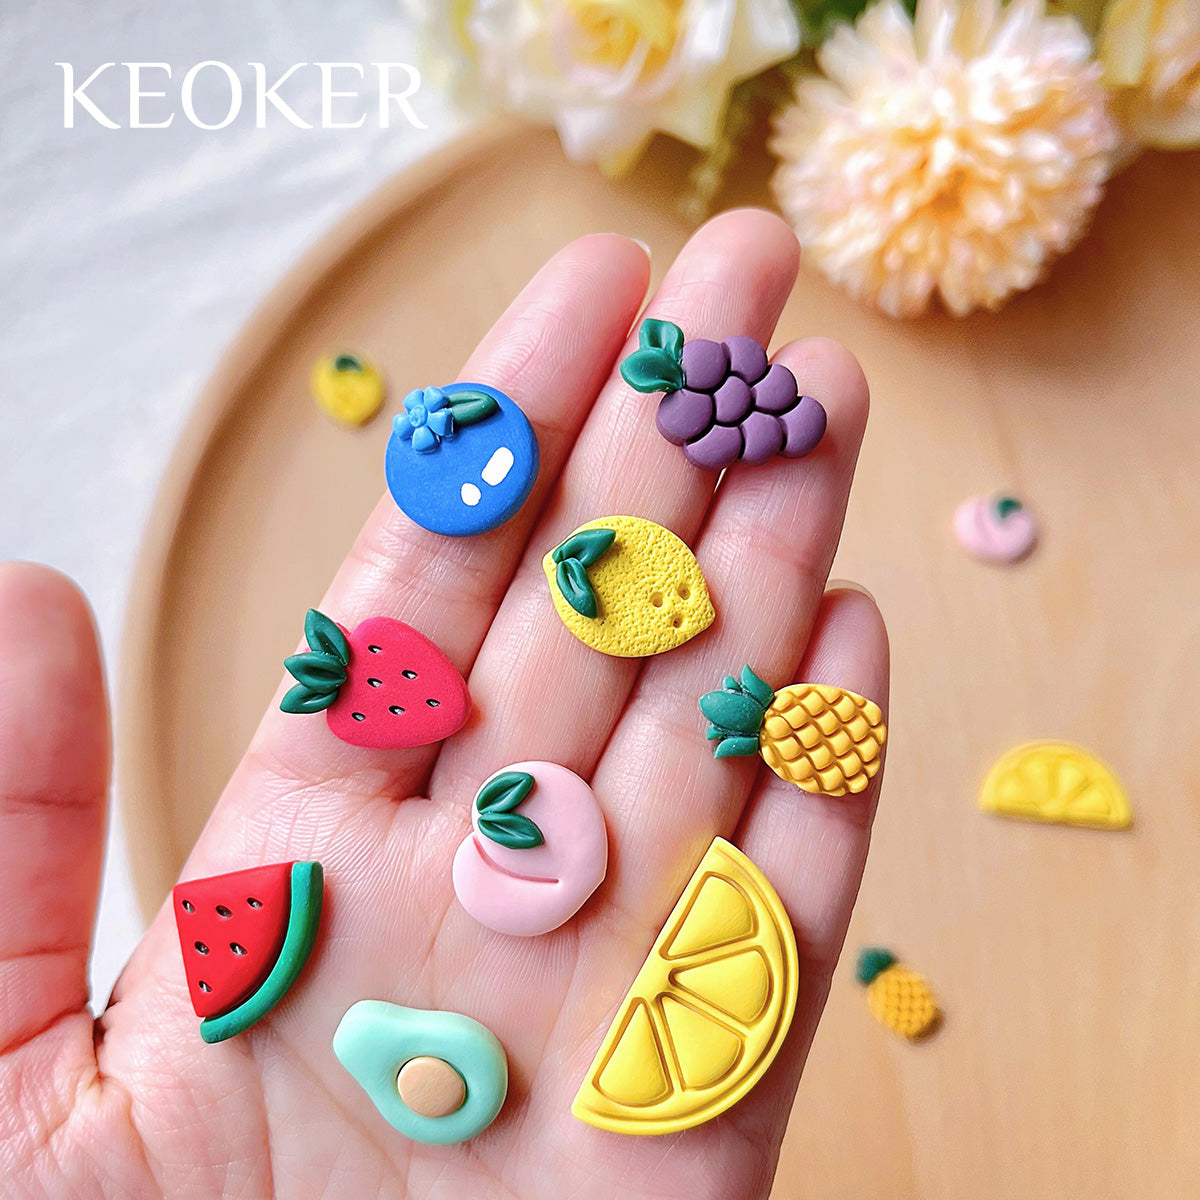 KEOKER Polymer Clay Cutters, Set of 17 Shapes Aztec Clay Cutters for  Polymer Clay Jewelry, Western Clay Cutters for Polymer Clay Jewelry Making